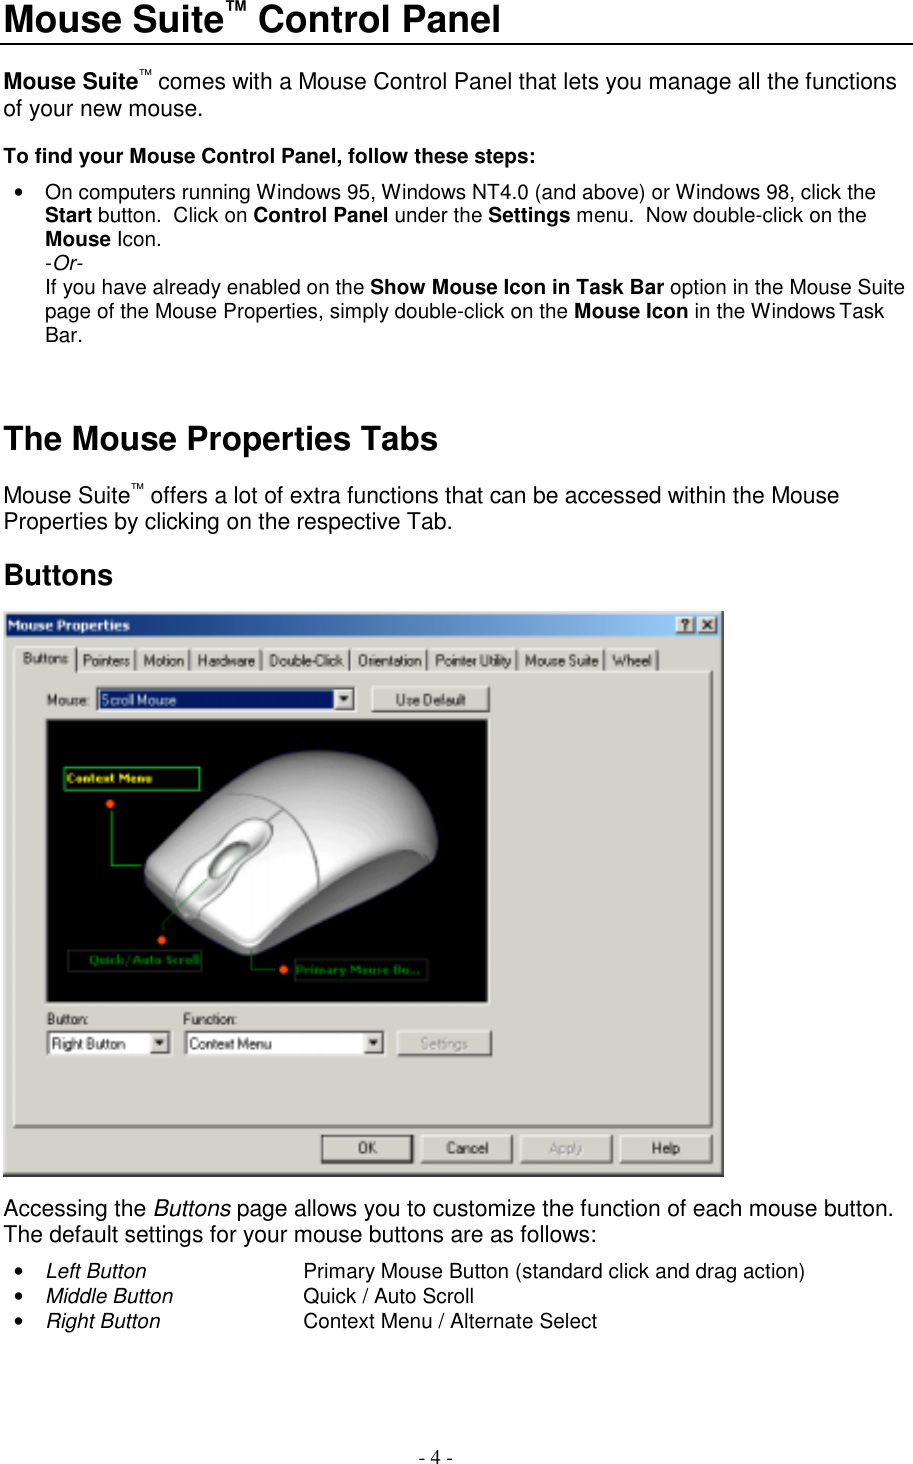 - 4 -Mouse Suite™ Control PanelMouse Suite™ comes with a Mouse Control Panel that lets you manage all the functionsof your new mouse.To find your Mouse Control Panel, follow these steps:•  On computers running Windows 95, Windows NT4.0 (and above) or Windows 98, click theStart button.  Click on Control Panel under the Settings menu.  Now double-click on theMouse Icon.-Or-If you have already enabled on the Show Mouse Icon in Task Bar option in the Mouse Suitepage of the Mouse Properties, simply double-click on the Mouse Icon in the Windows TaskBar.The Mouse Properties TabsMouse Suite™ offers a lot of extra functions that can be accessed within the MouseProperties by clicking on the respective Tab.ButtonsAccessing the Buttons page allows you to customize the function of each mouse button.The default settings for your mouse buttons are as follows:• Left Button Primary Mouse Button (standard click and drag action)• Middle Button Quick / Auto Scroll• Right Button Context Menu / Alternate Select